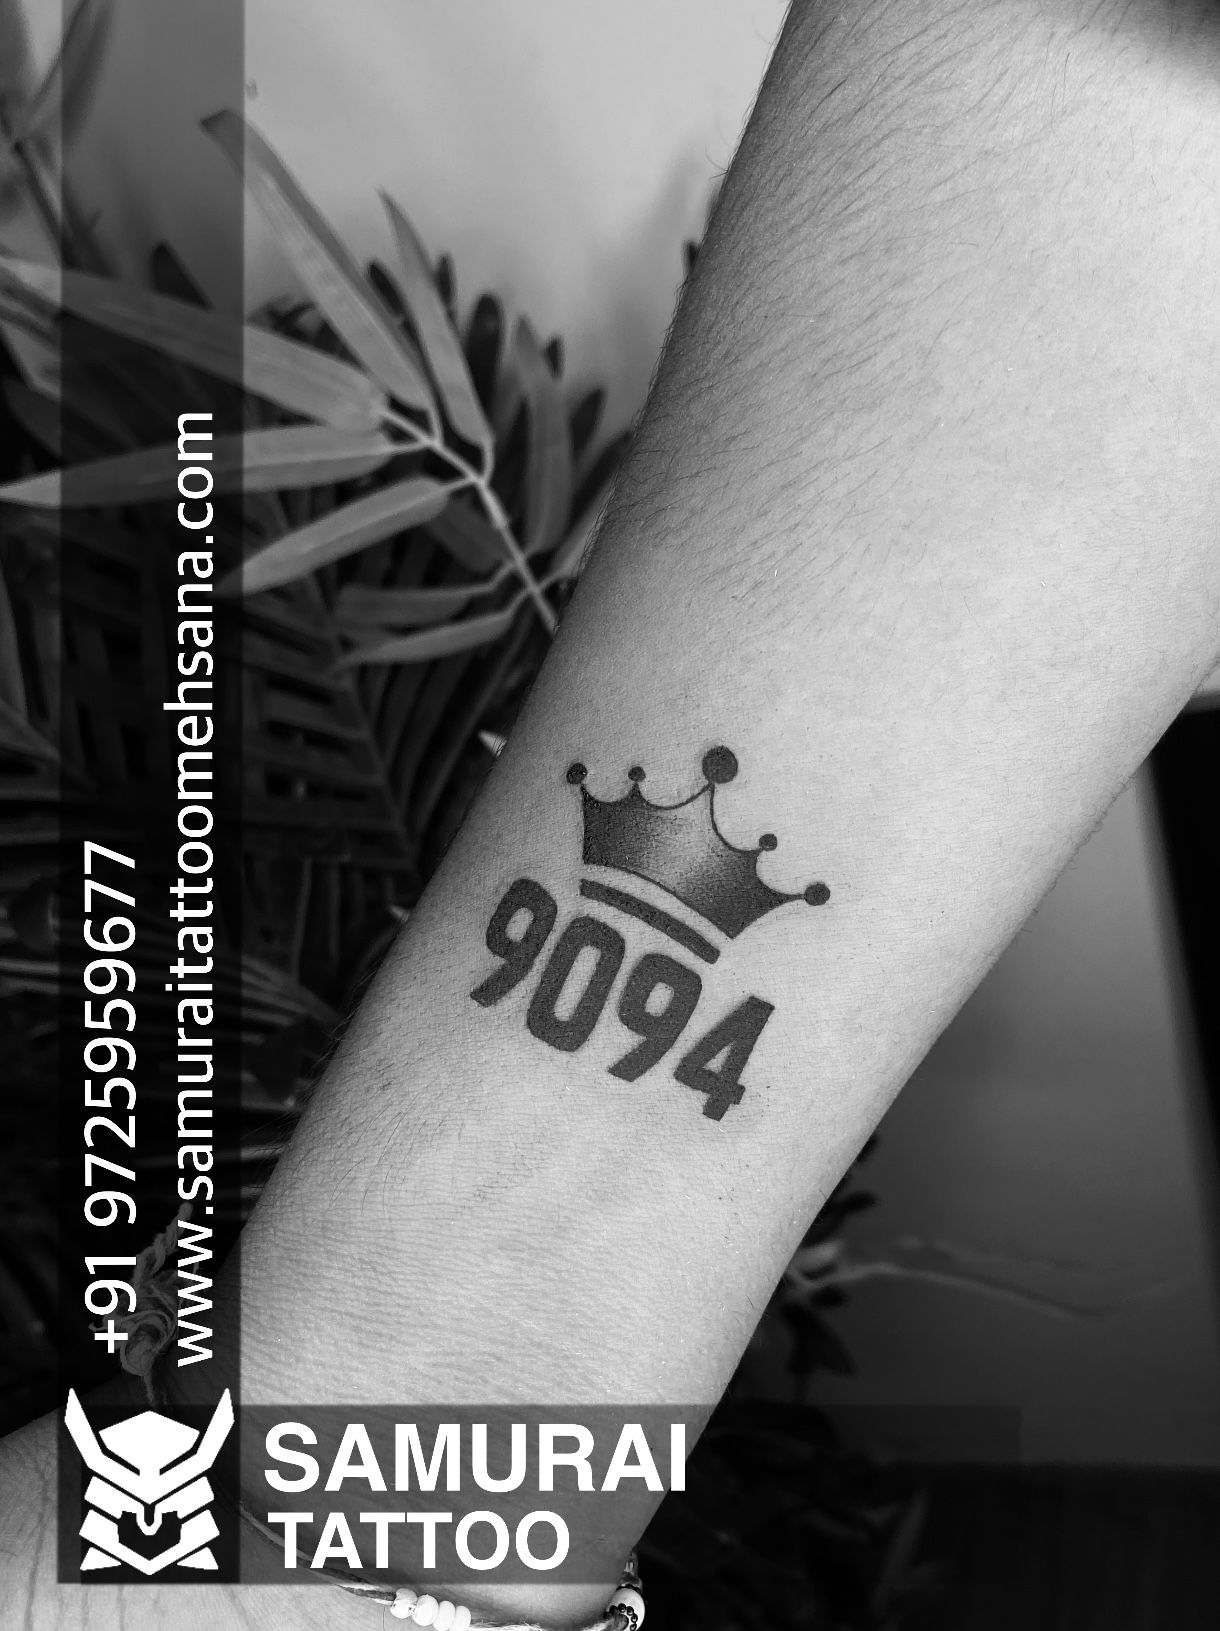 30+ King and Queen Tattoos | Tattoofanblog